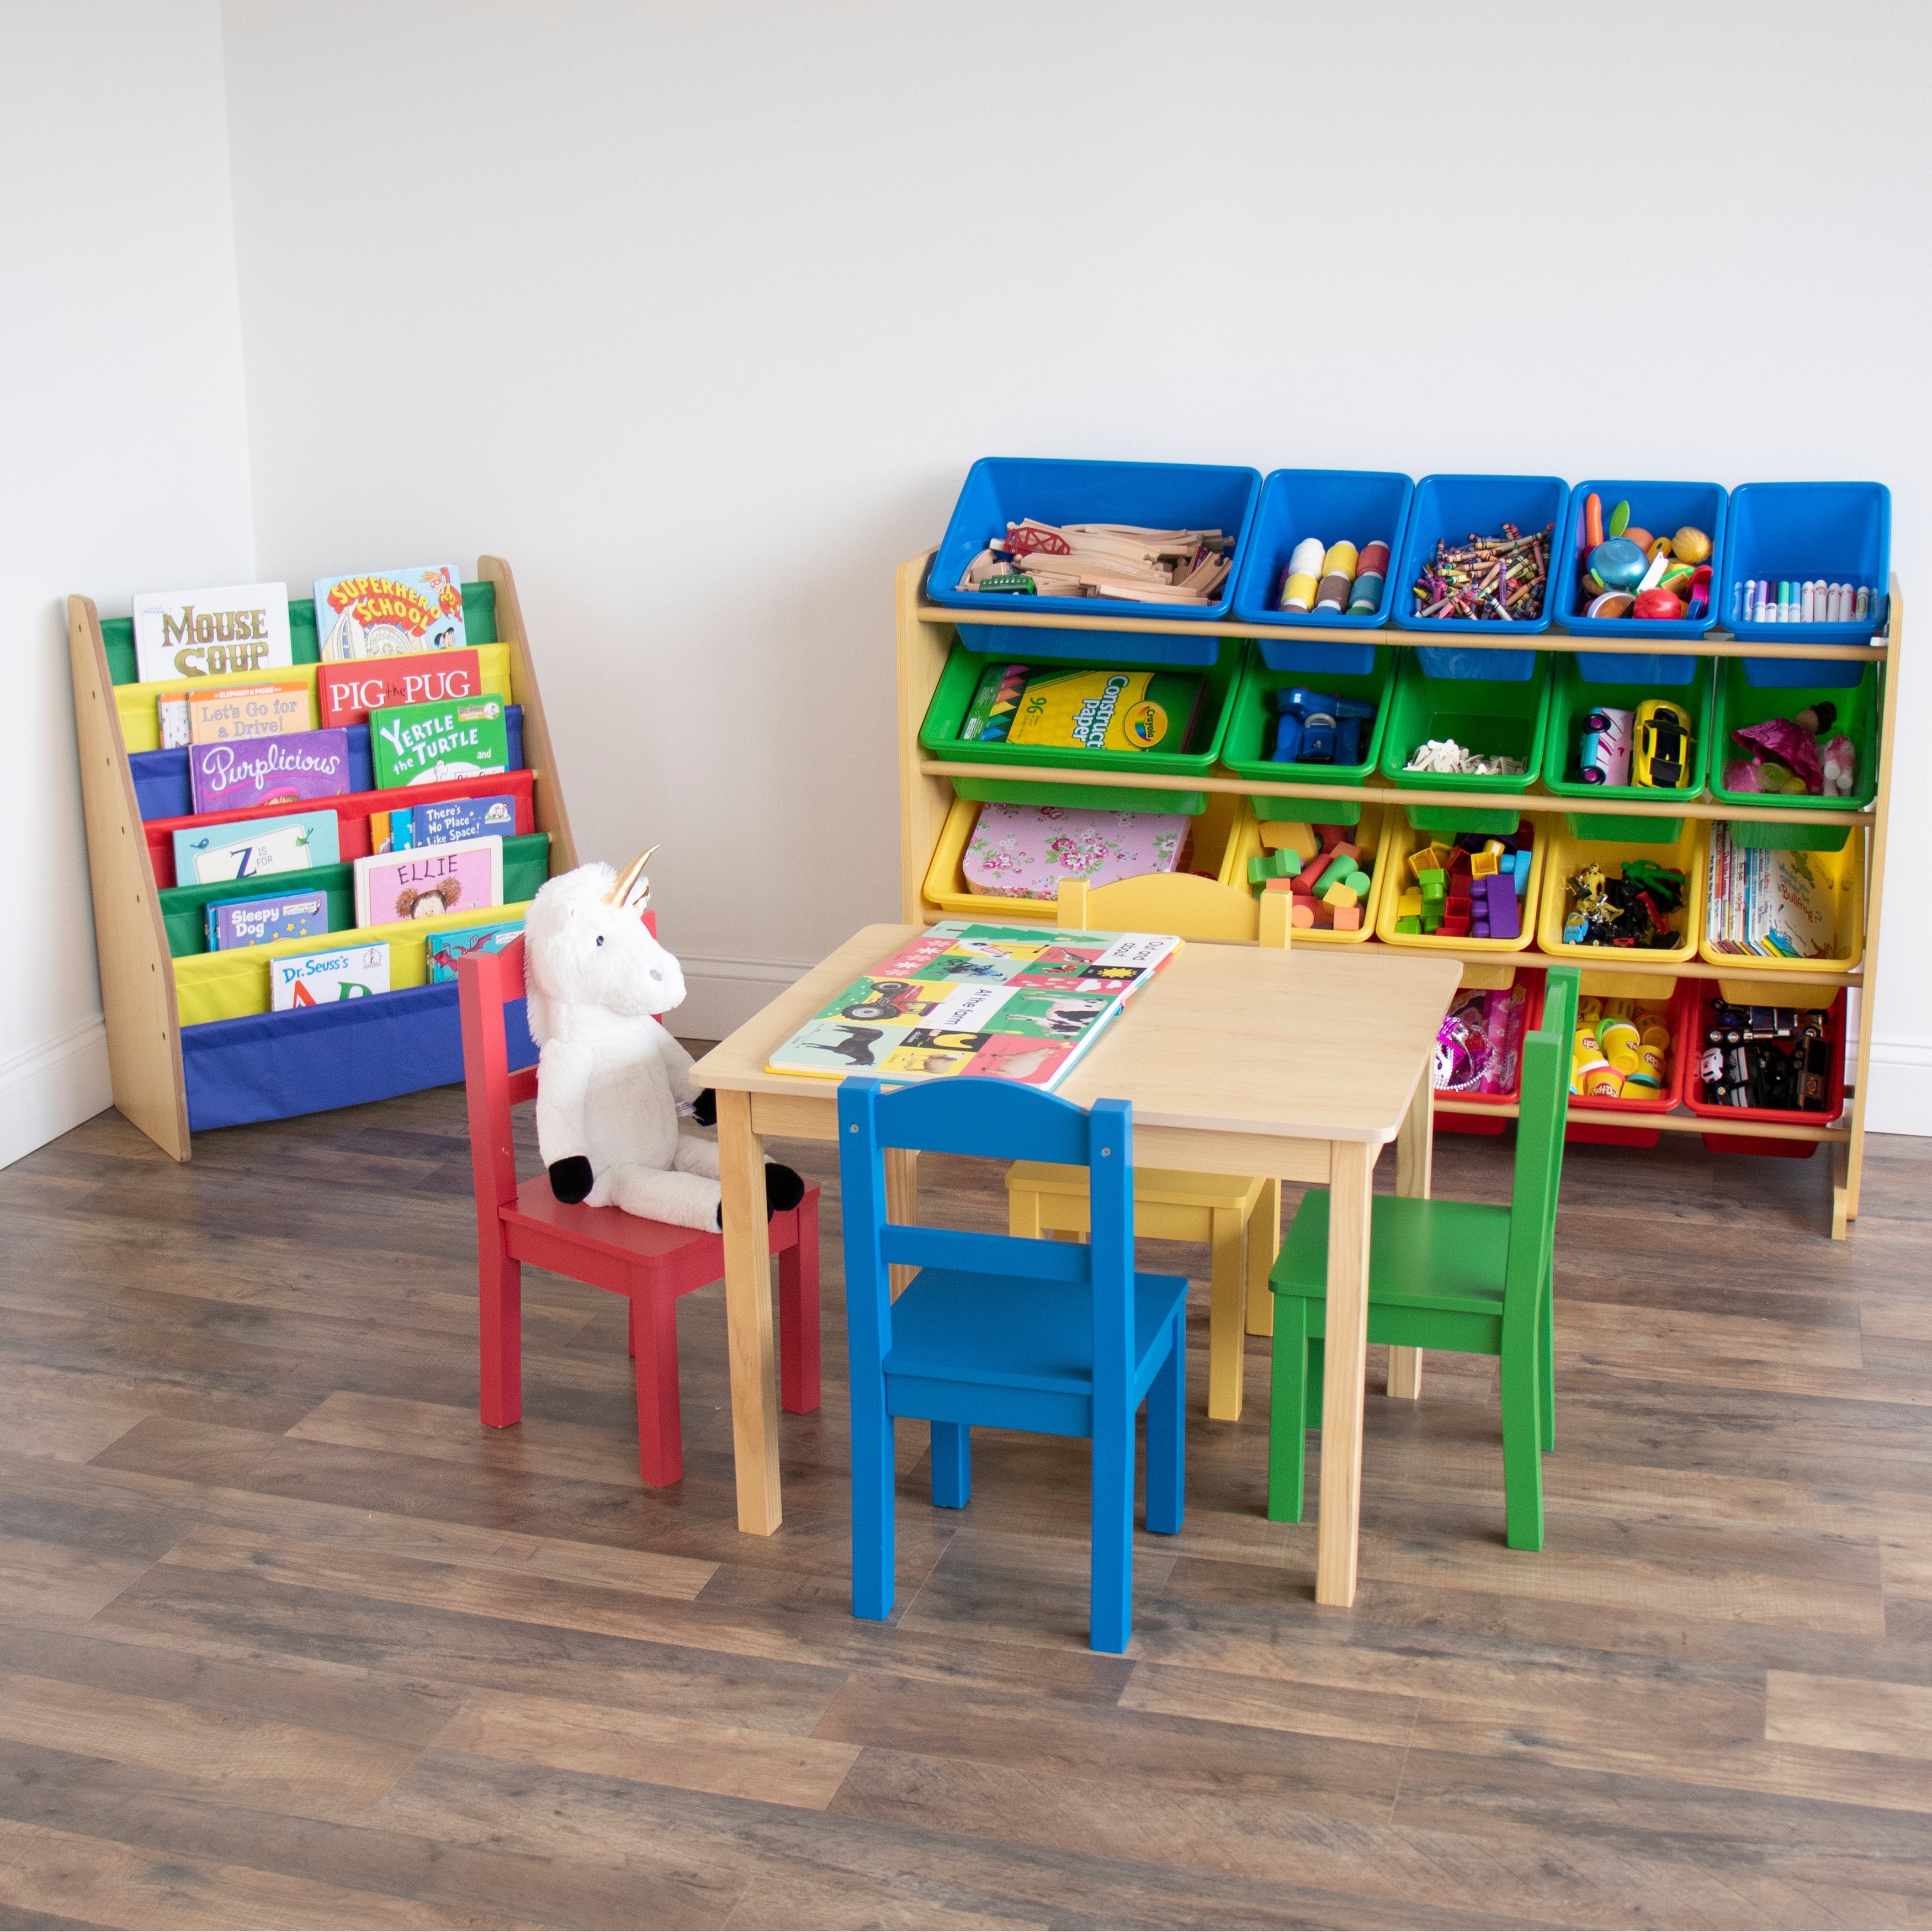 https://ak1.ostkcdn.com/images/products/is/images/direct/304249882aea44a21025315f0e00474bc50012c8/Humble-Crew-XL-Toy-Storage-Organizer-with-20-Storage-Bins.jpg